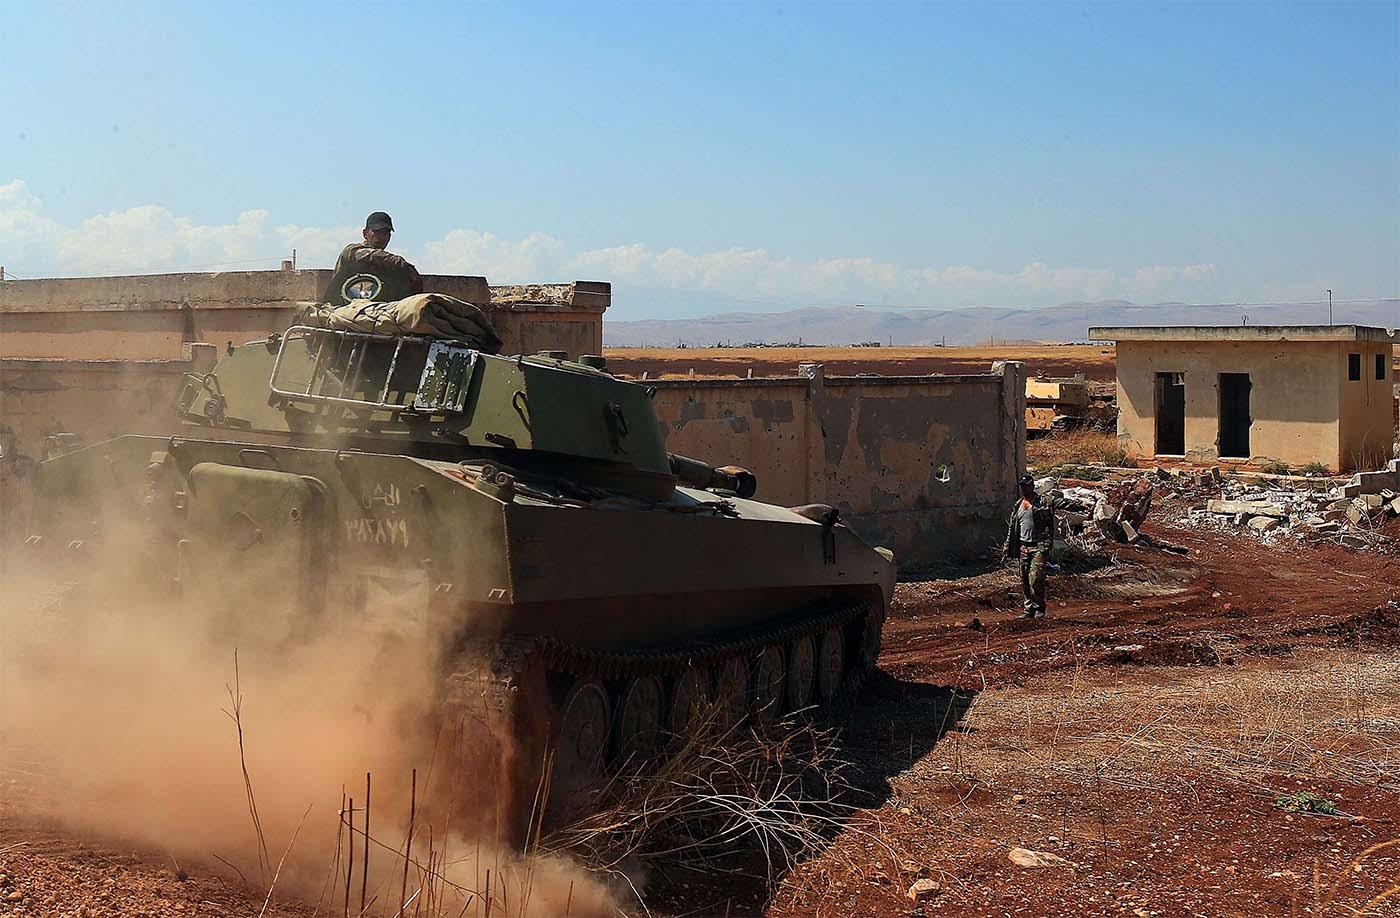 Syrian army has now marched into a town in Idlib province in rebel hands since 2014